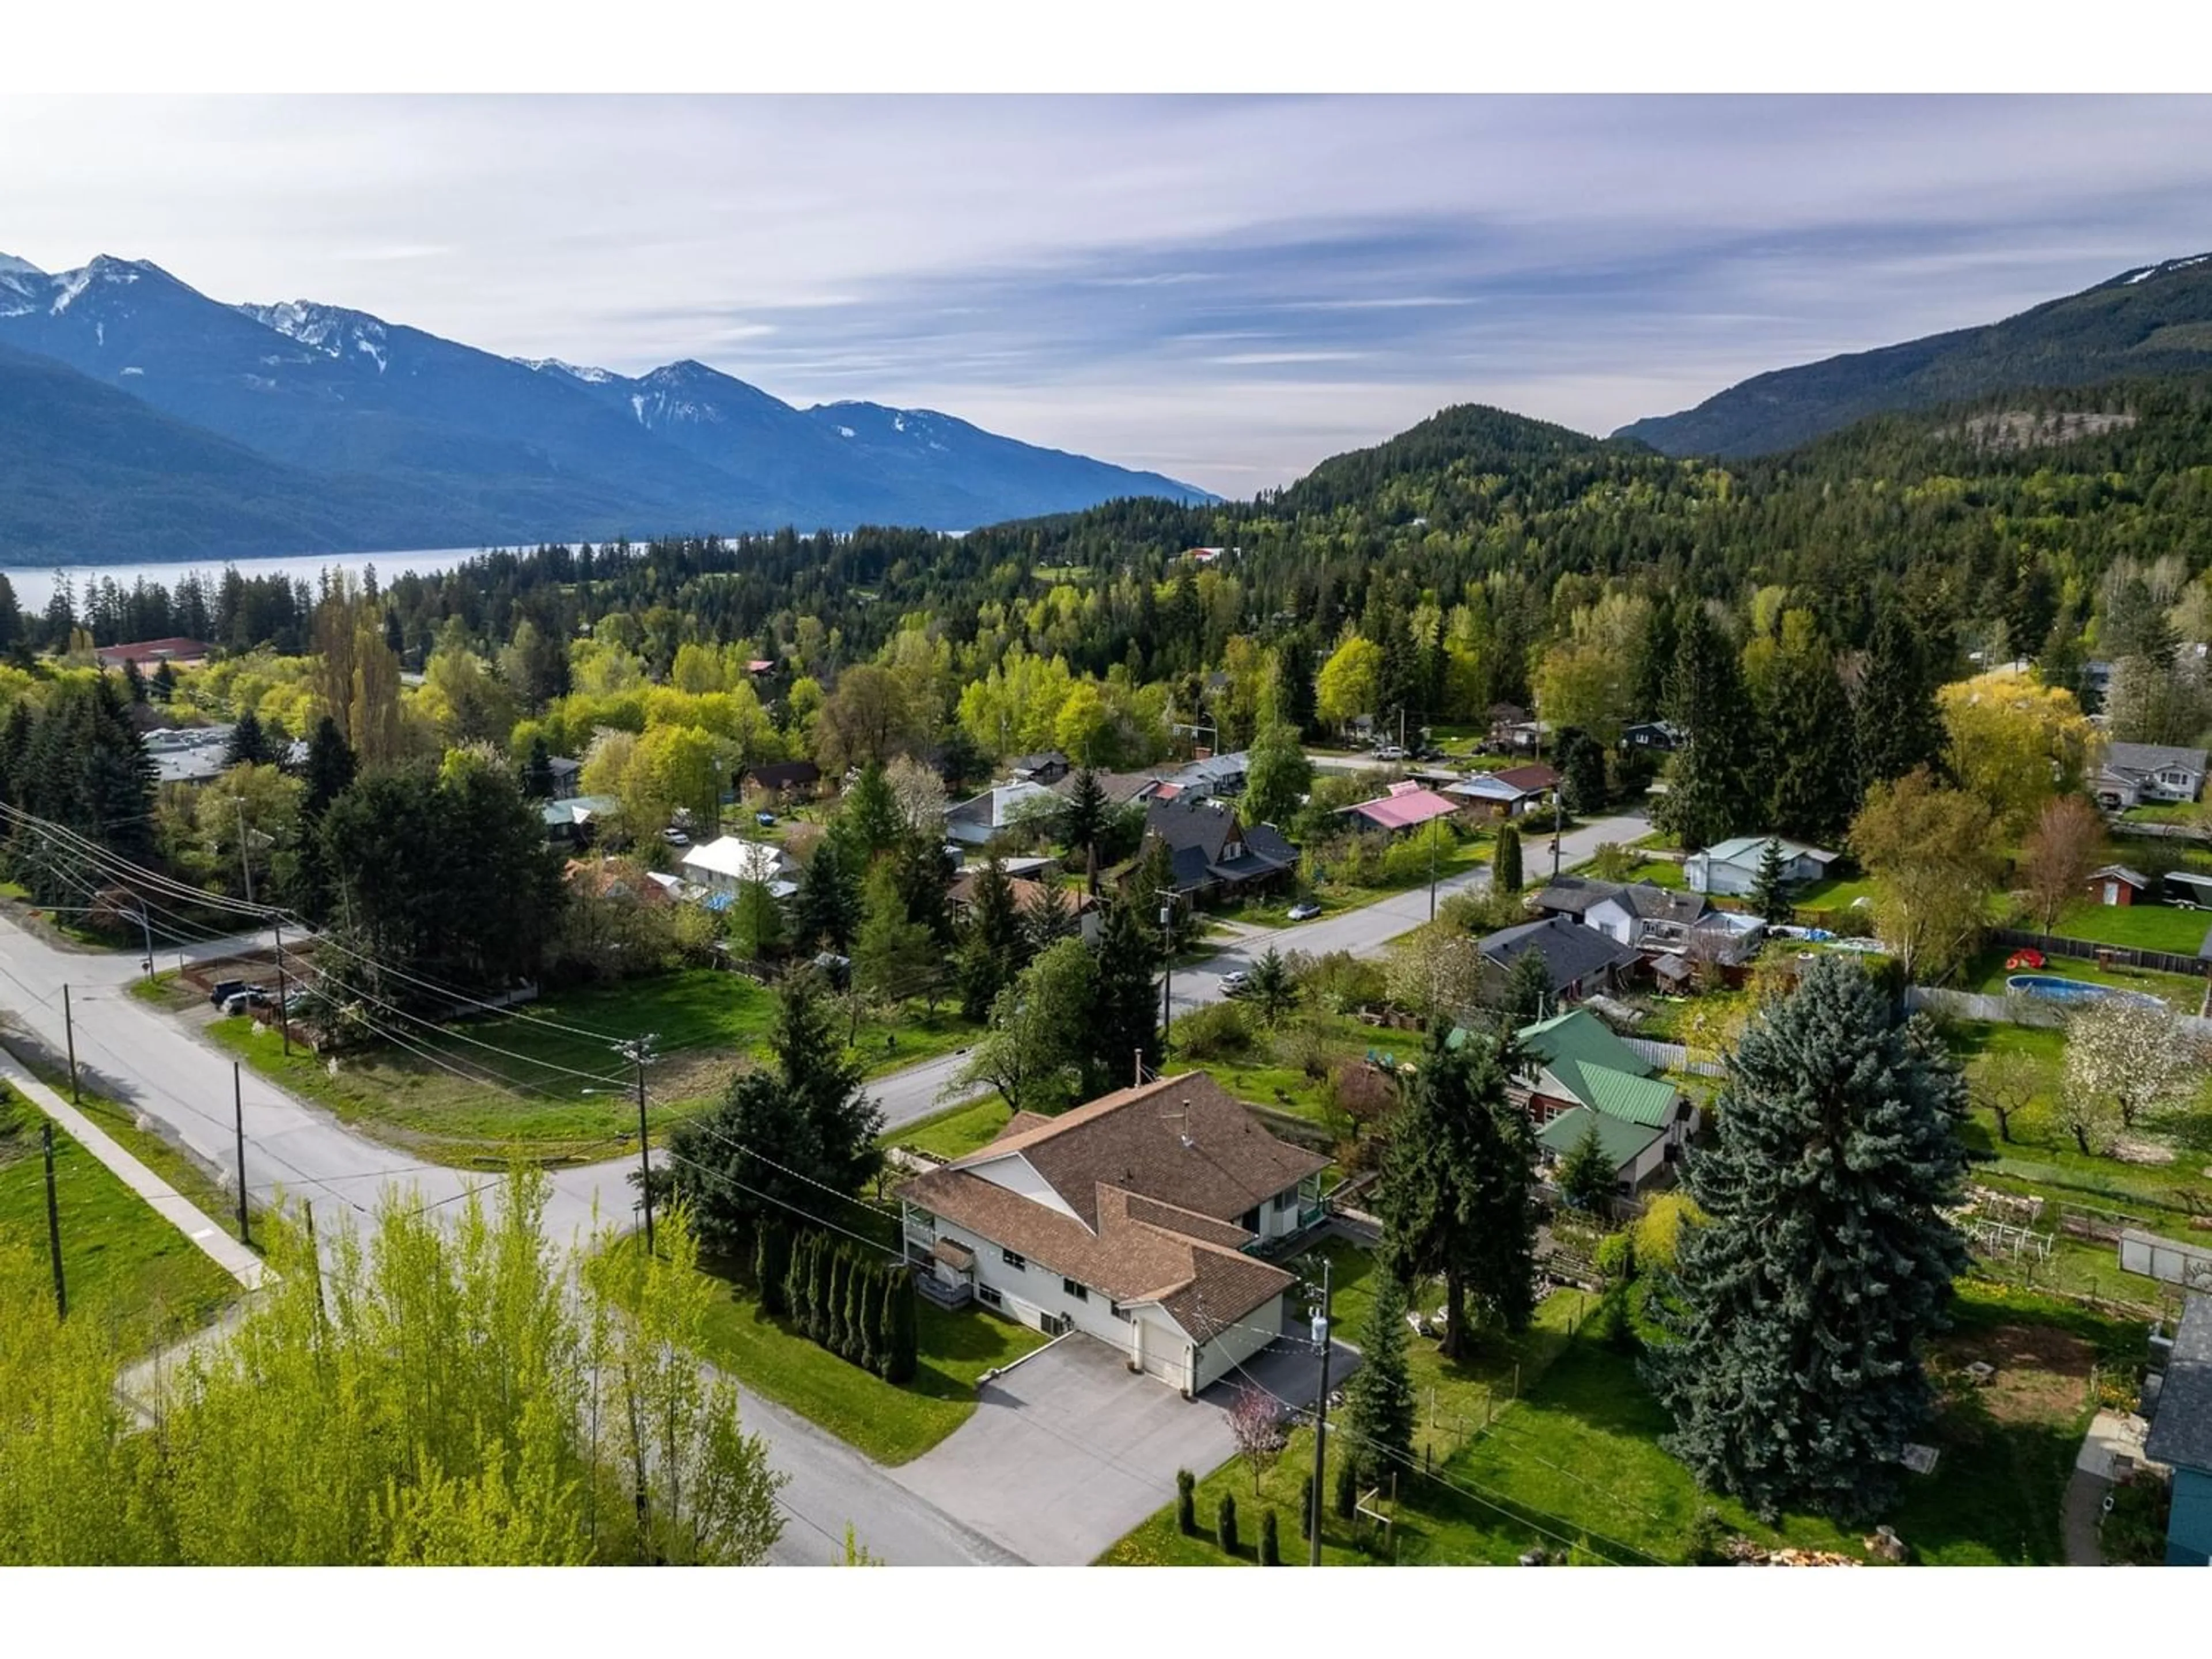 Lakeview for 403 8TH STREET S, Kaslo British Columbia V0G1M0